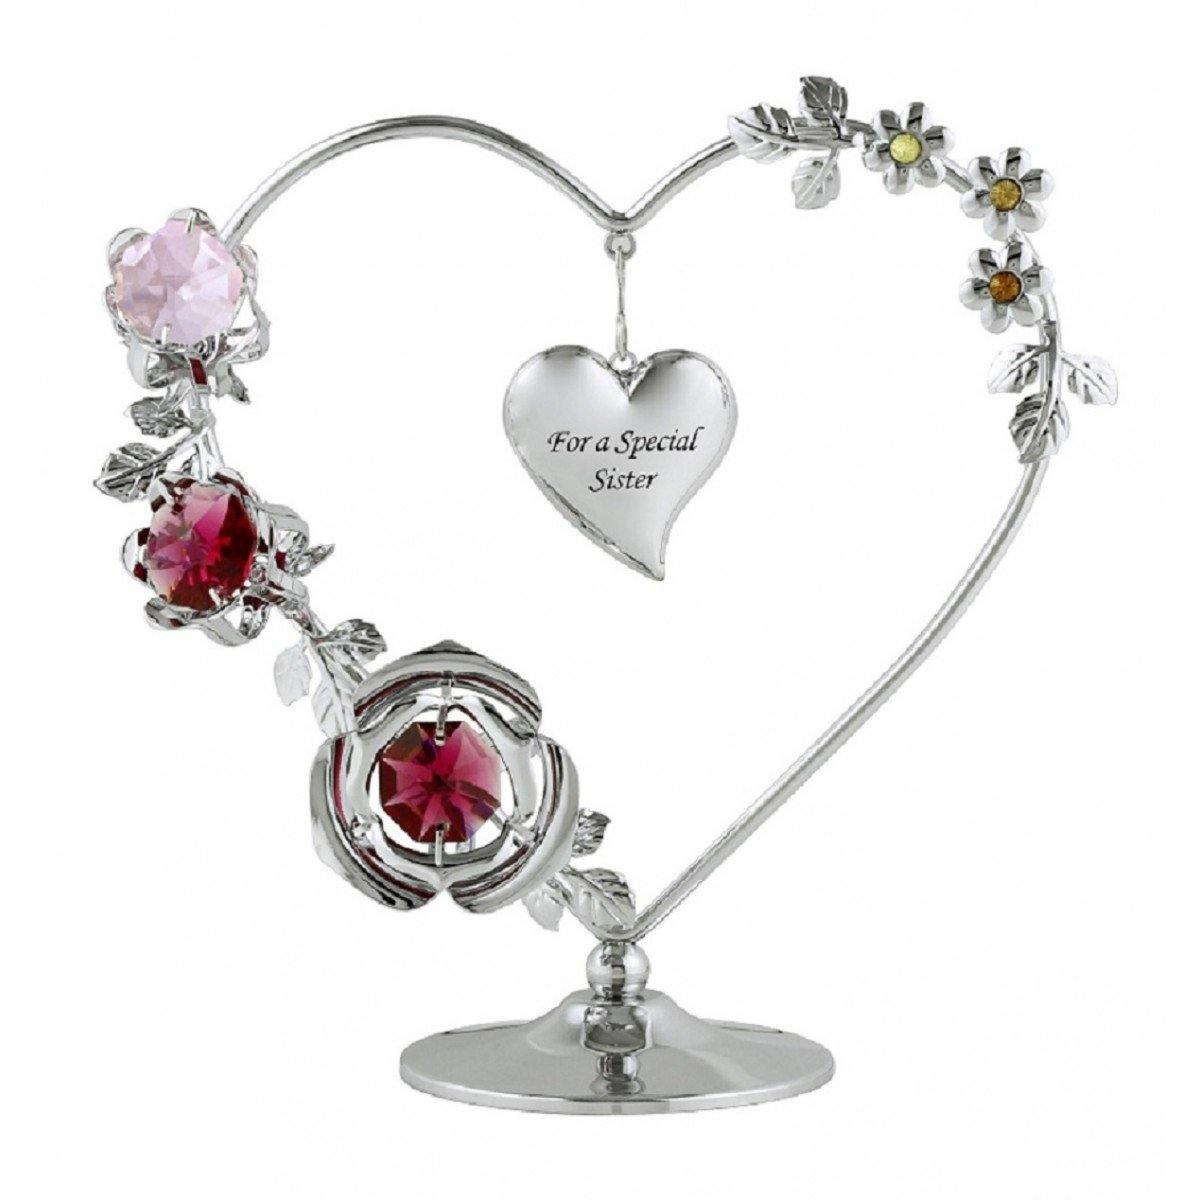 Special Sister Heart Wreath (Crystal World) - Gallery Gifts Online 